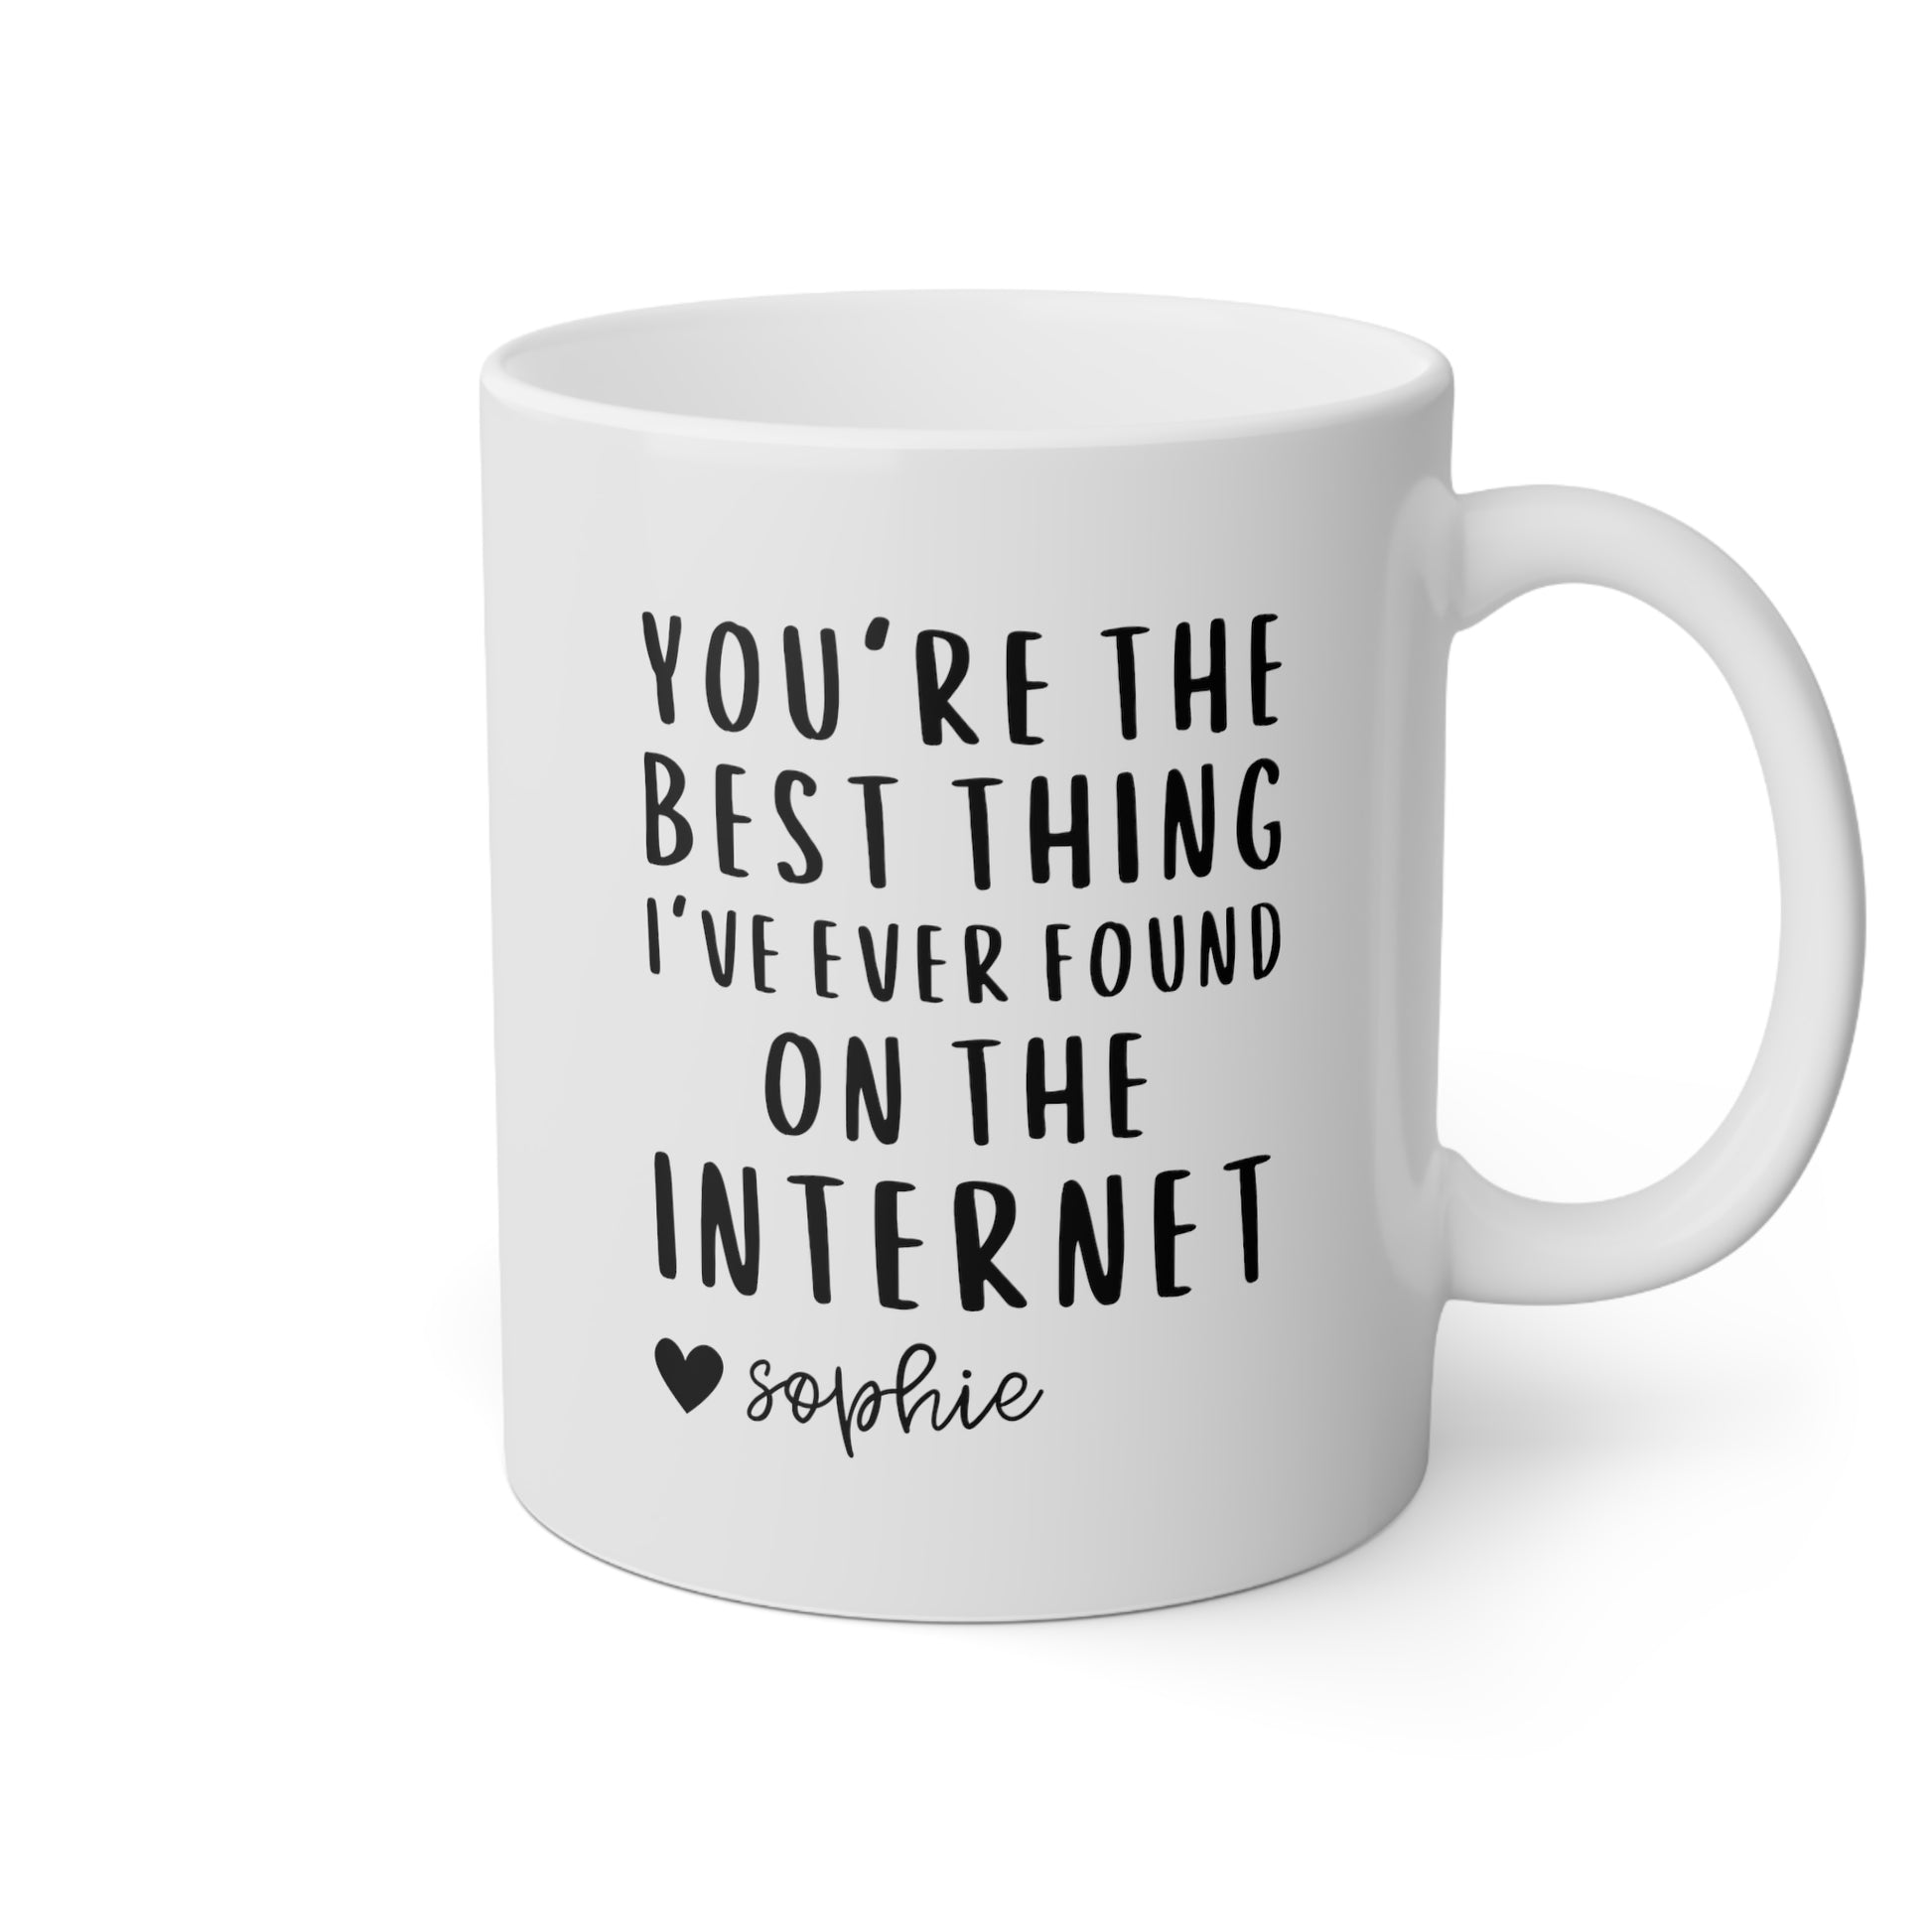 you are the best thing ive ever found on the internet personalized custom 11oz white funny coffee mug tea cup gift valentines anniversary boyfriend girlfriend online dating match waveywares wavey wares side view